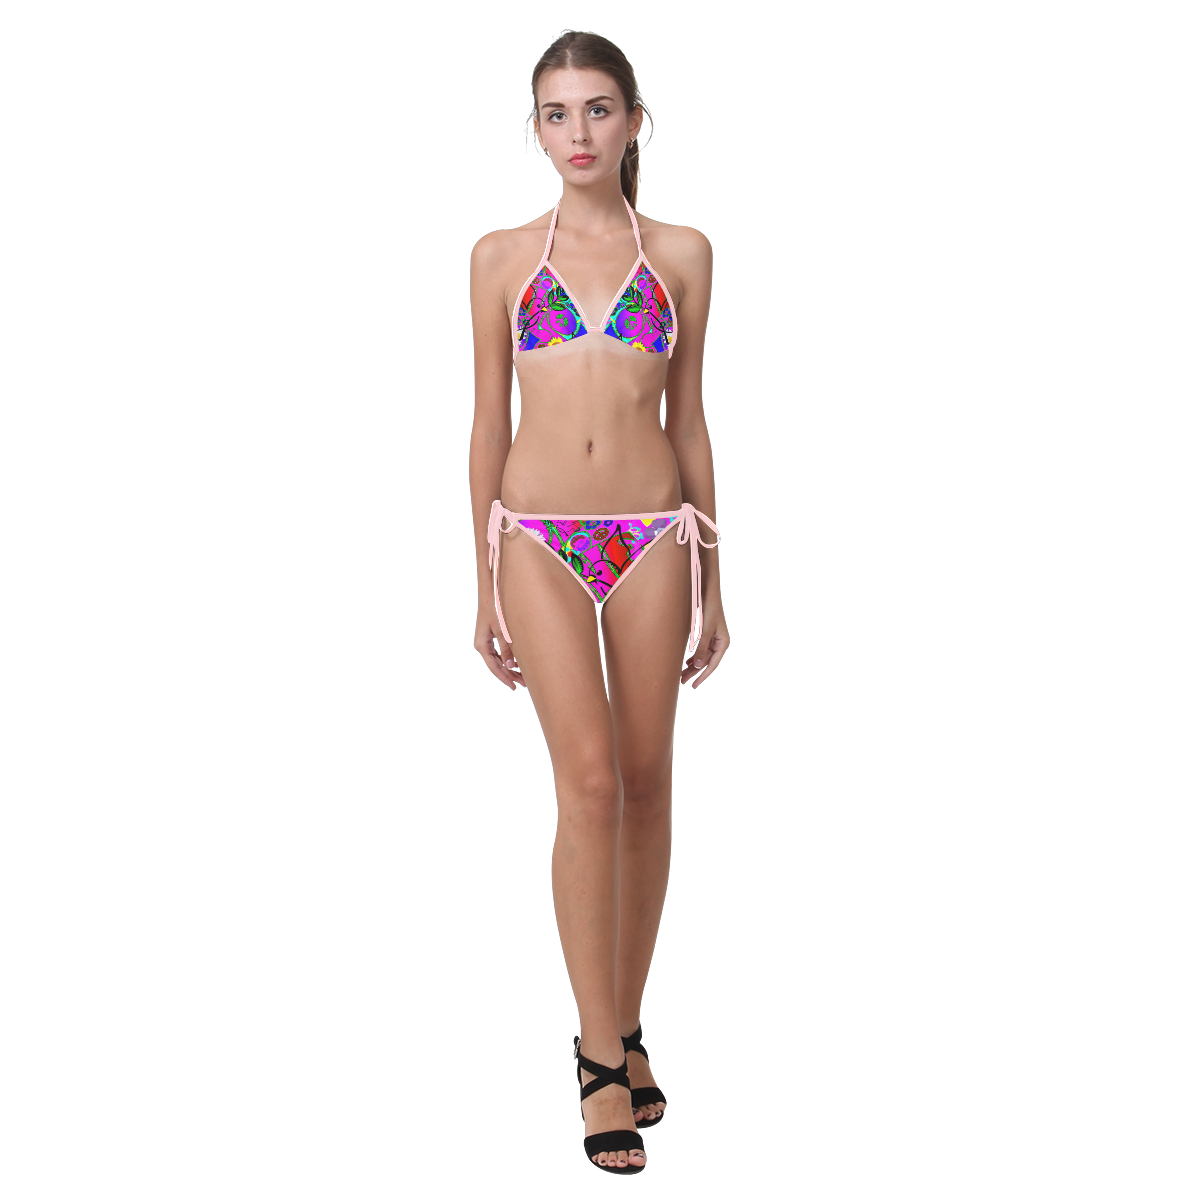 From the "With Love" Fashion Collection Custom Bikini Swimsuit (Model S01)